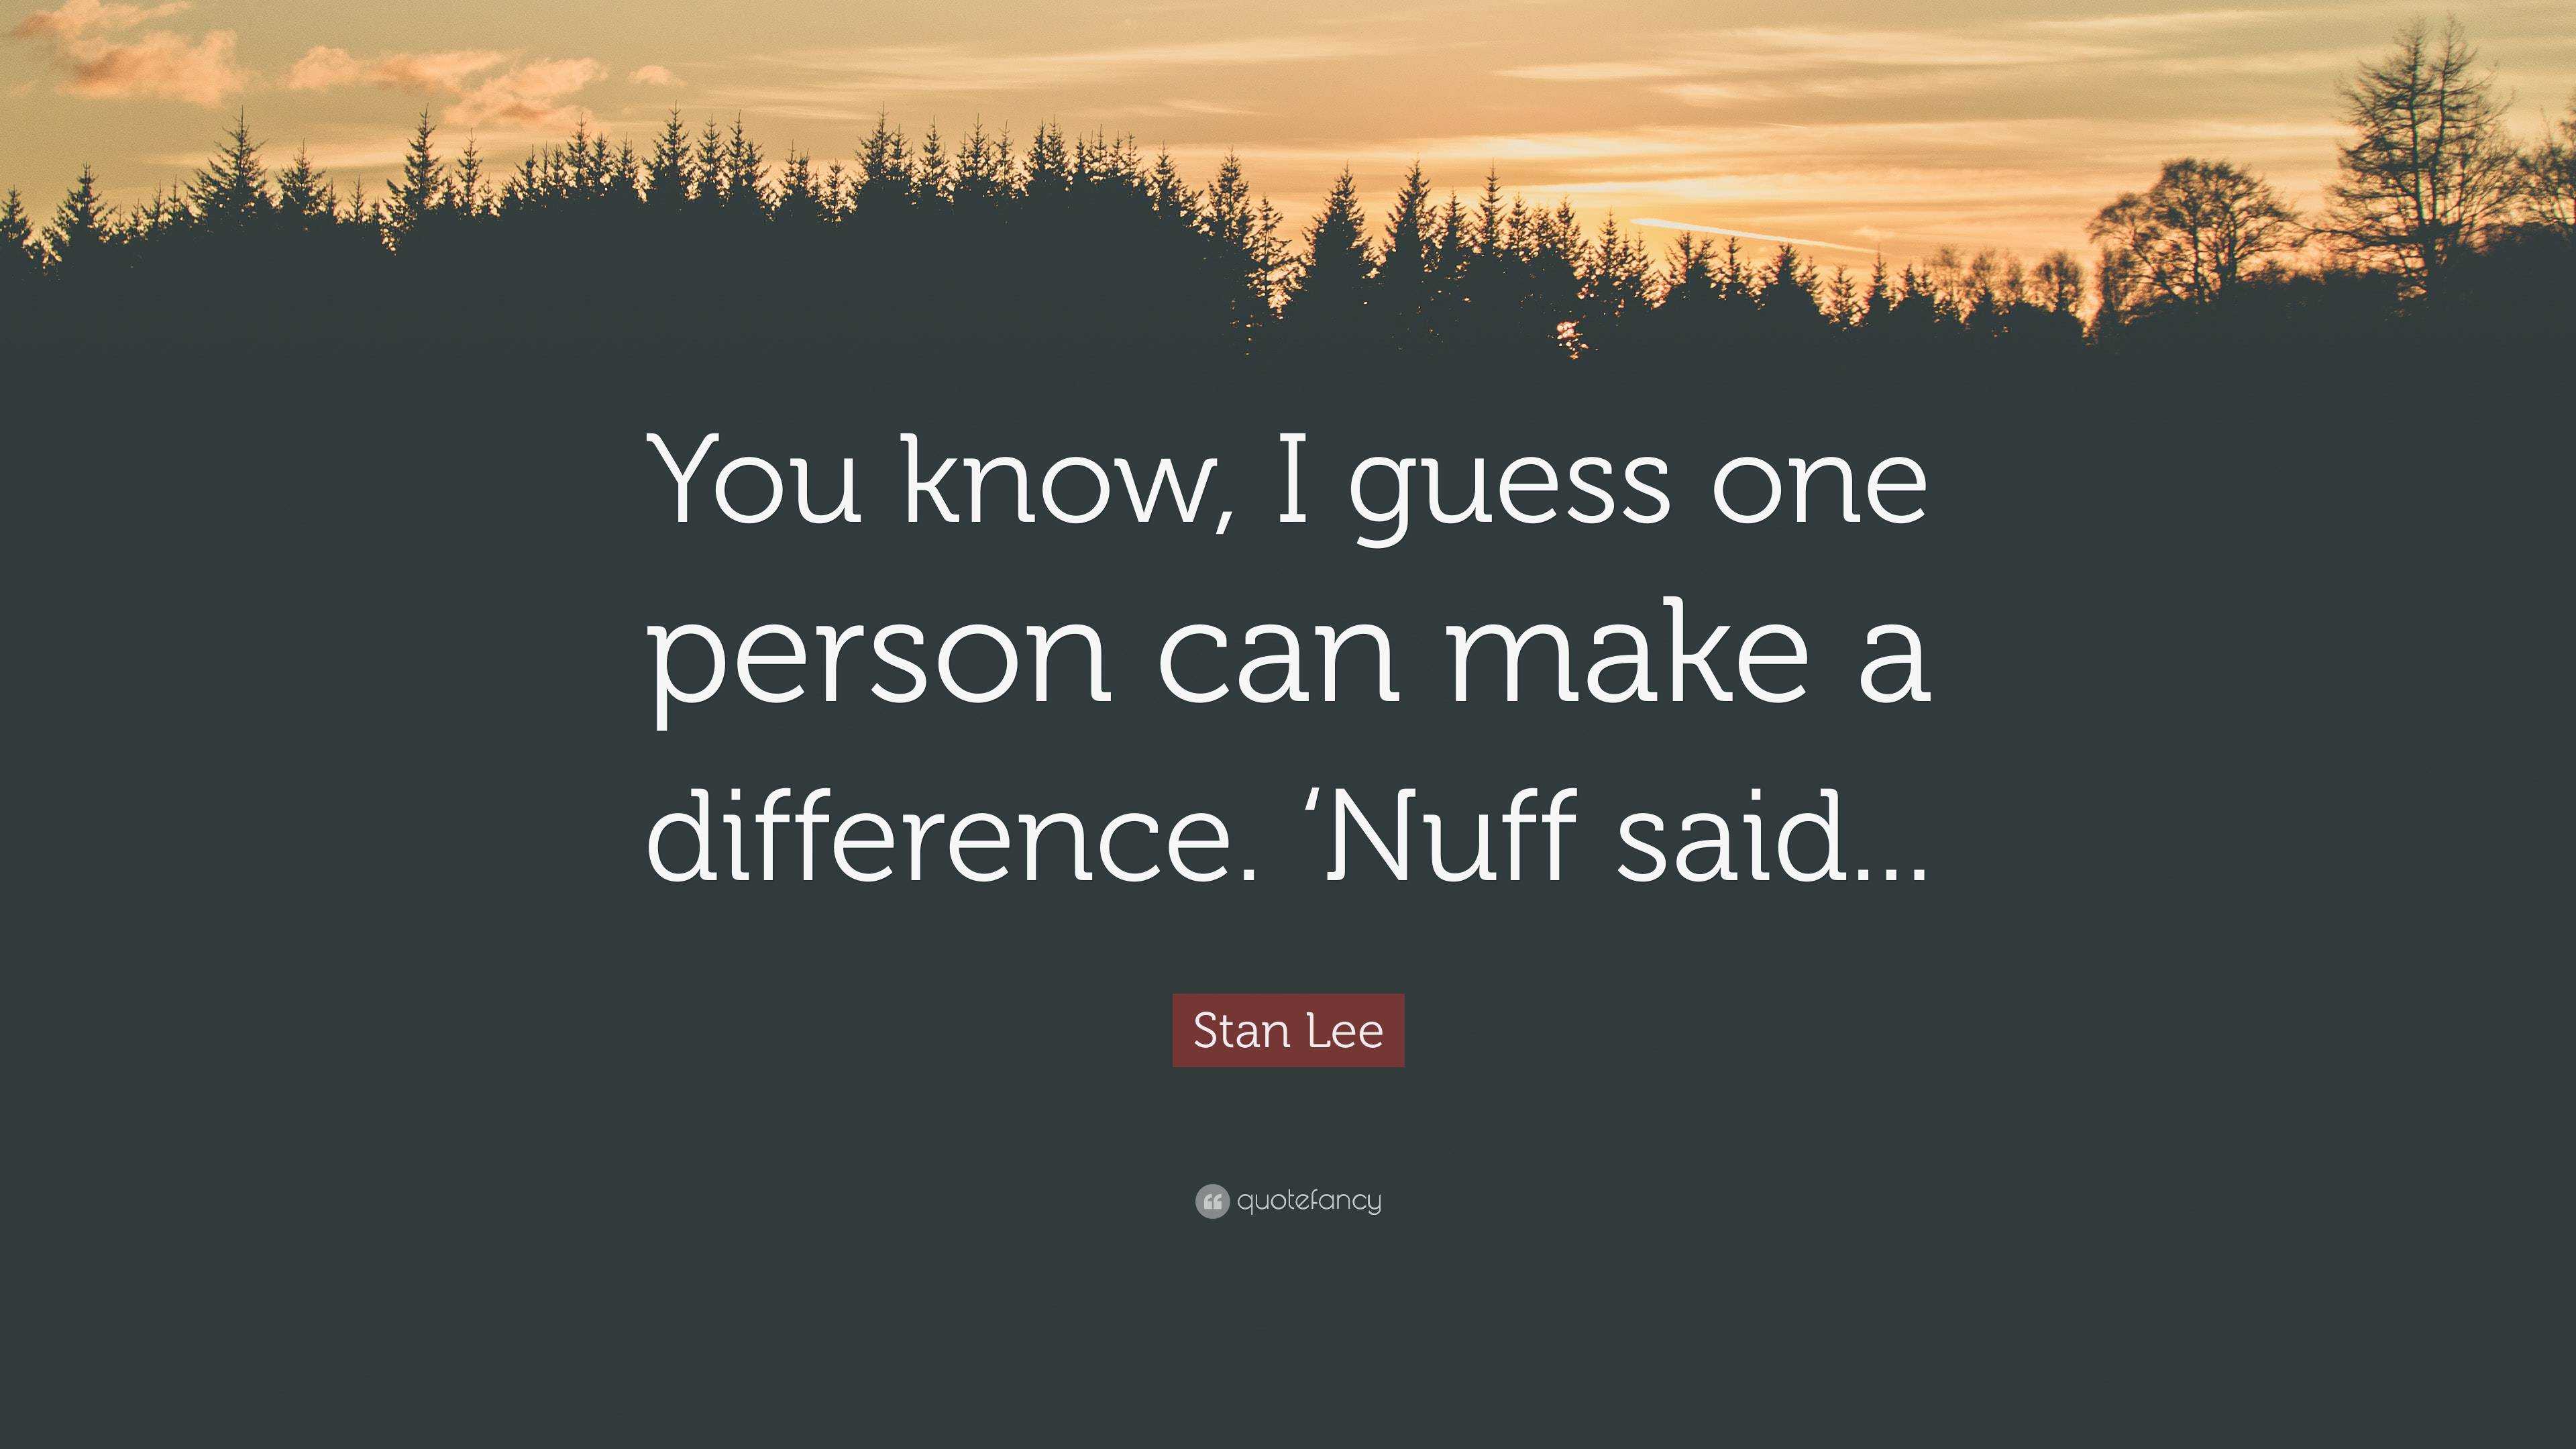 Stan Lee Quote: know, I guess one person can make a difference. 'Nuff said...”